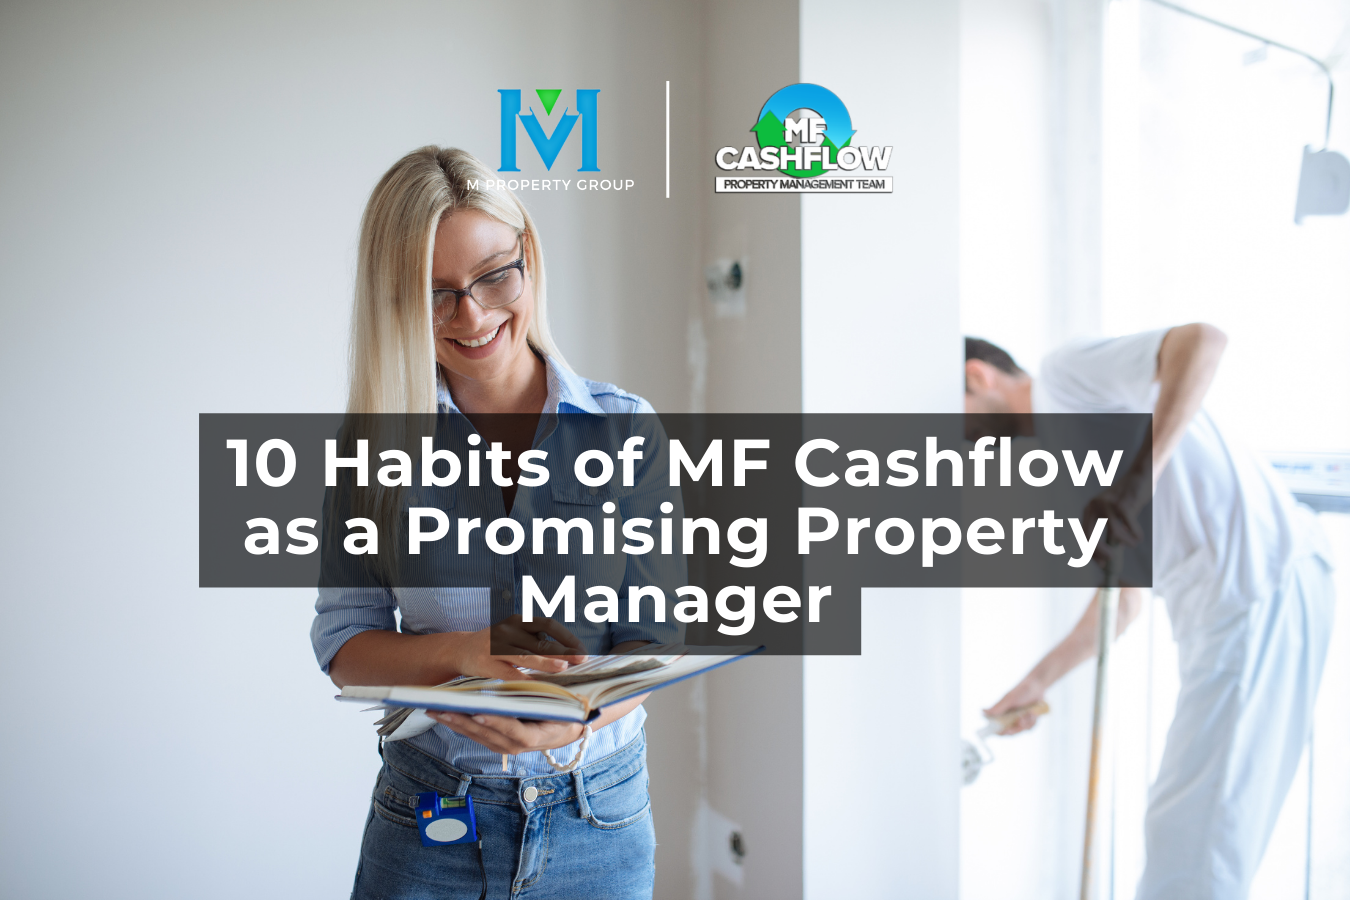 10 Habits of MF Cashflow as a Promising Property Manager